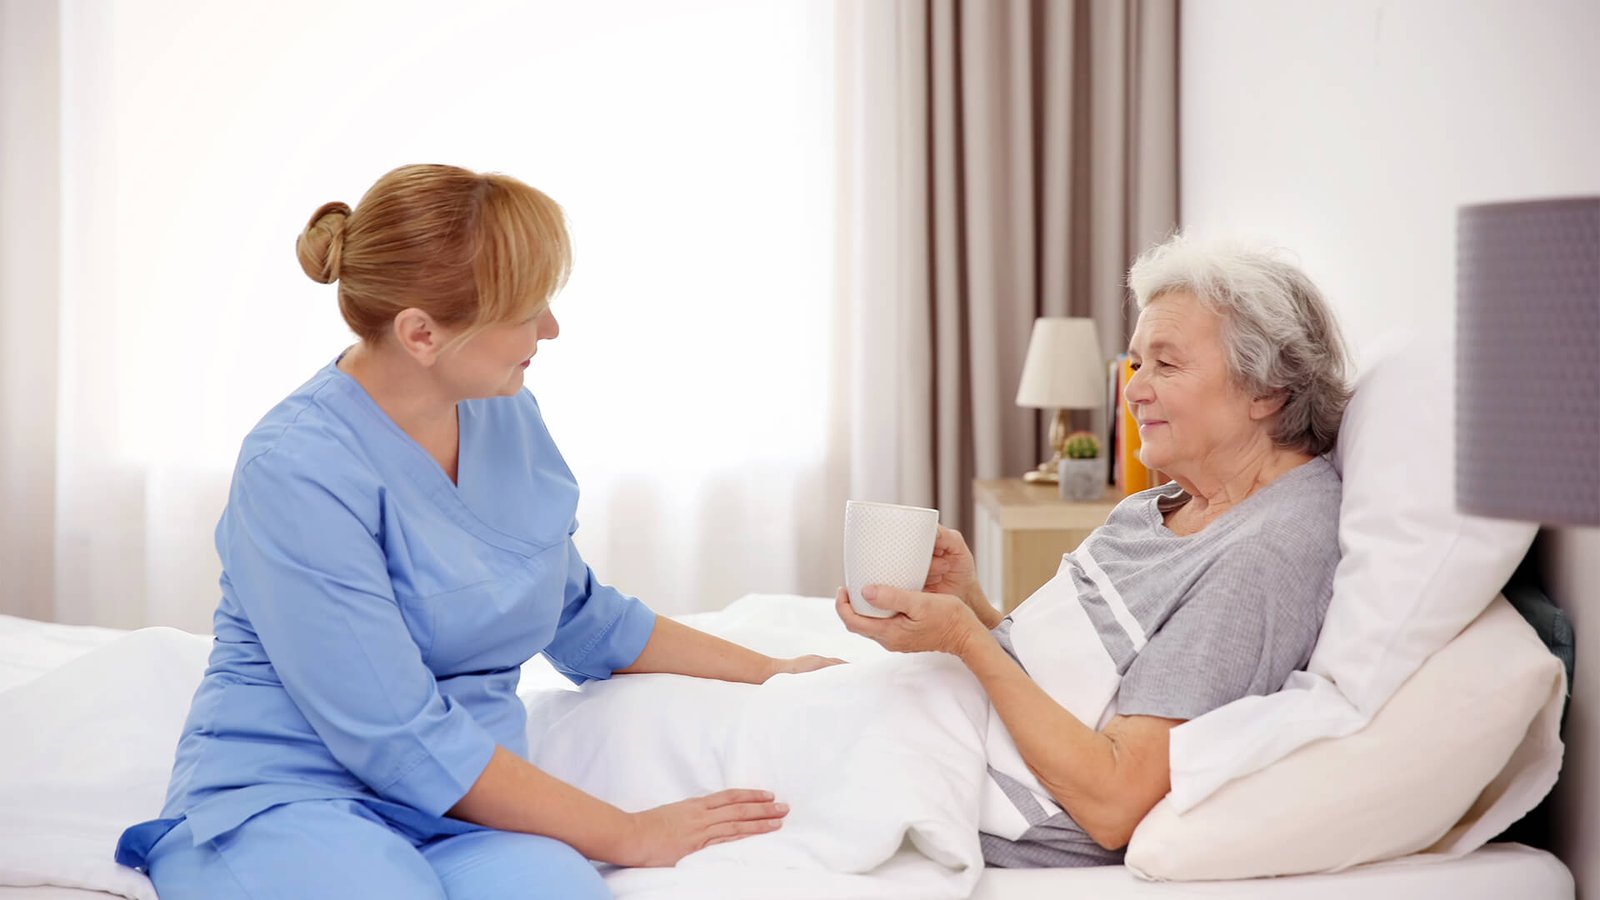 How To Find the Best Option for Home Care Nursing